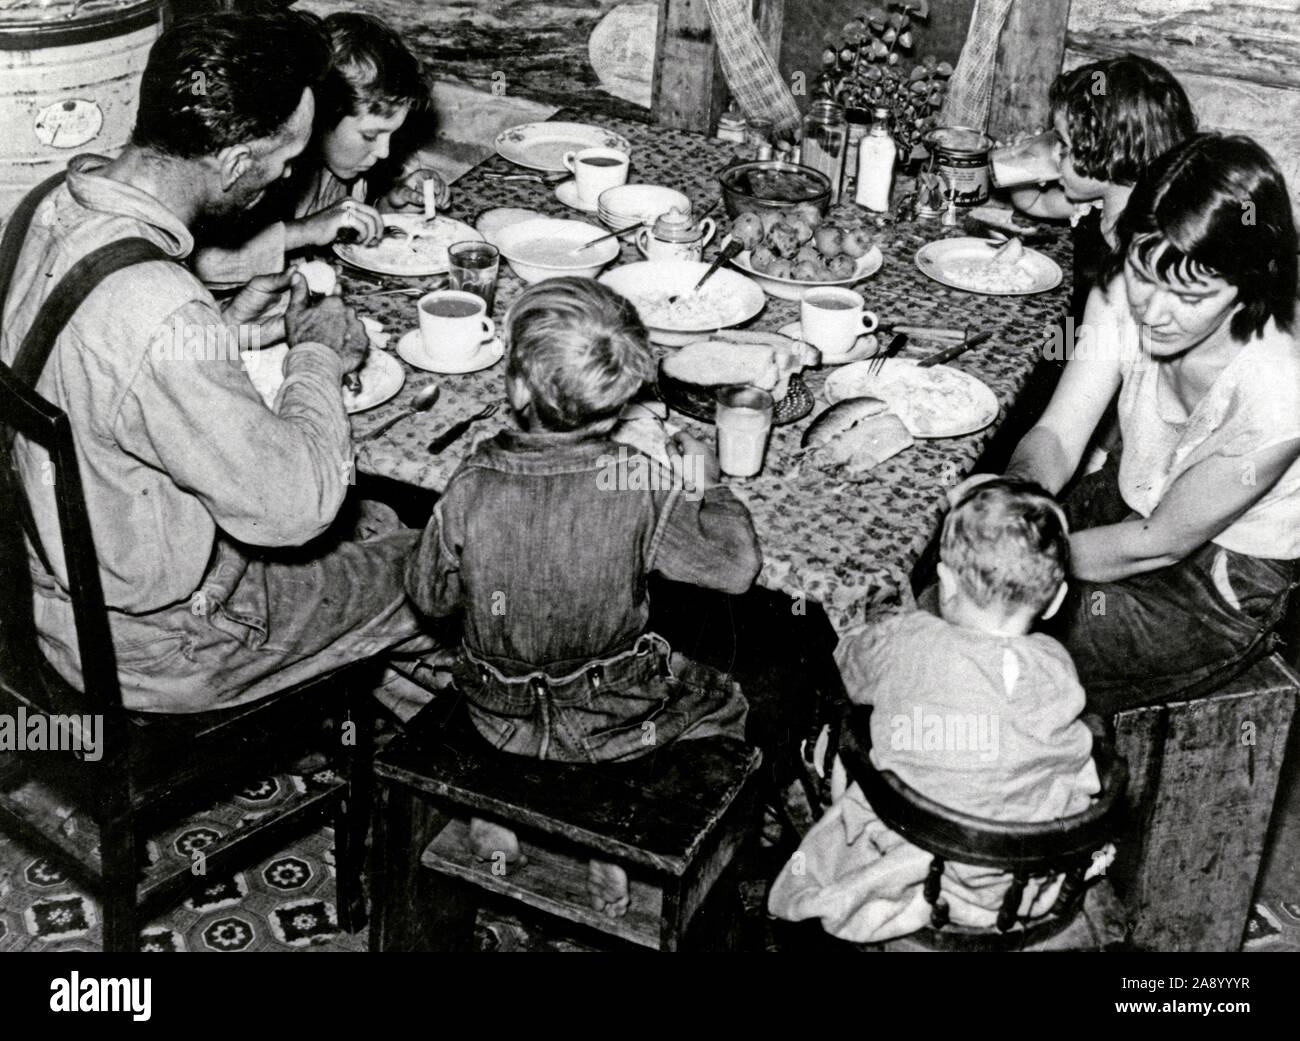 Family eating meal of hominy grits, mush, molasses, cabbages, potatoes, and rice ca. 1920 Stock Photo